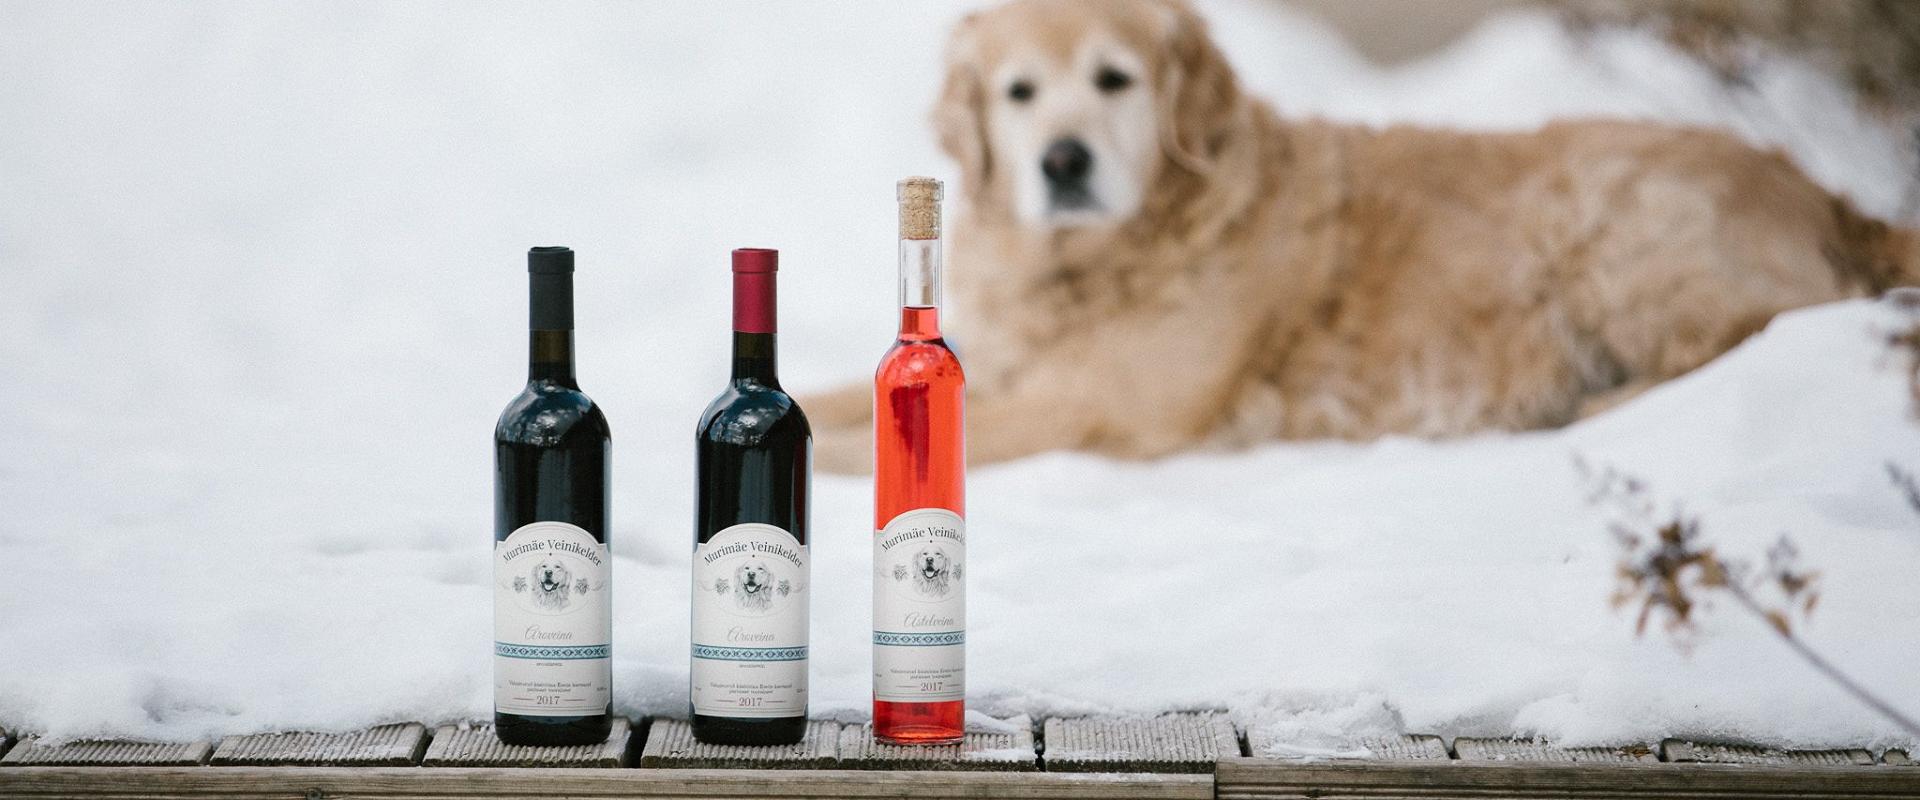 Estonian Wine Route Tour, dog in snow and Murimäe Winery's selection of products